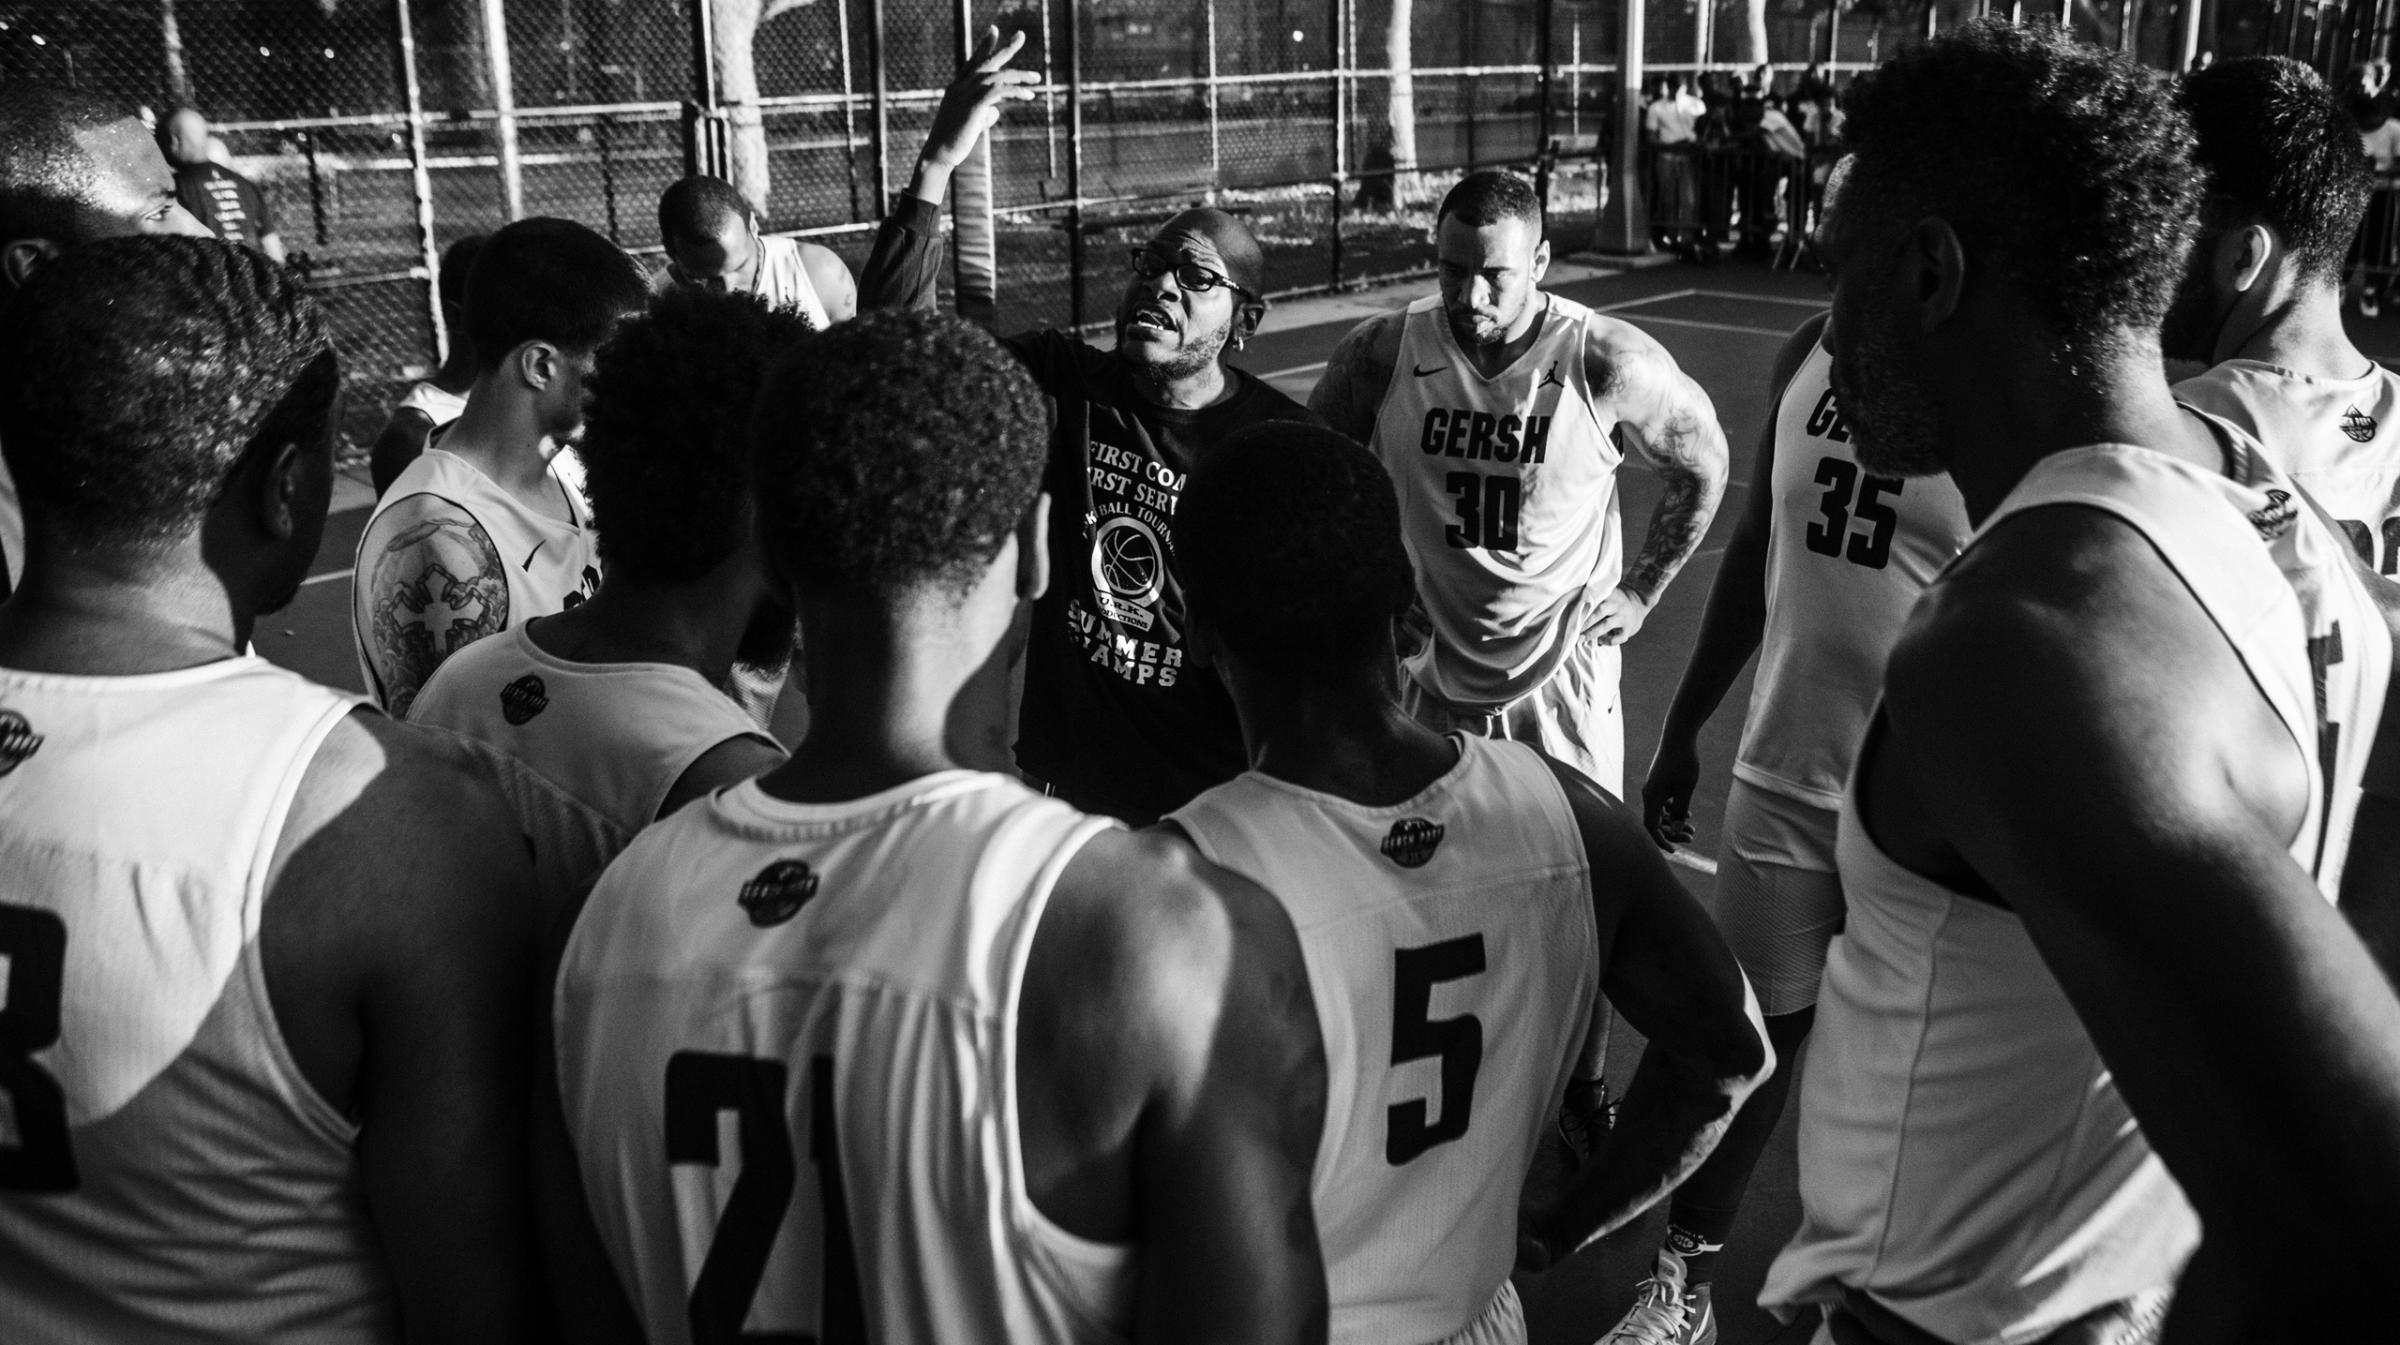 The coaches for both high school and Pro teams in New York City are very passionate about the game and wanting the players as, mostly, black men to take this sport and succeed both on and off the court.The coaches for both high school and Pro teams in New York City are very passionate about the game and wanting the players as, mostly, black men to take this sport and succeed both on and off the court.